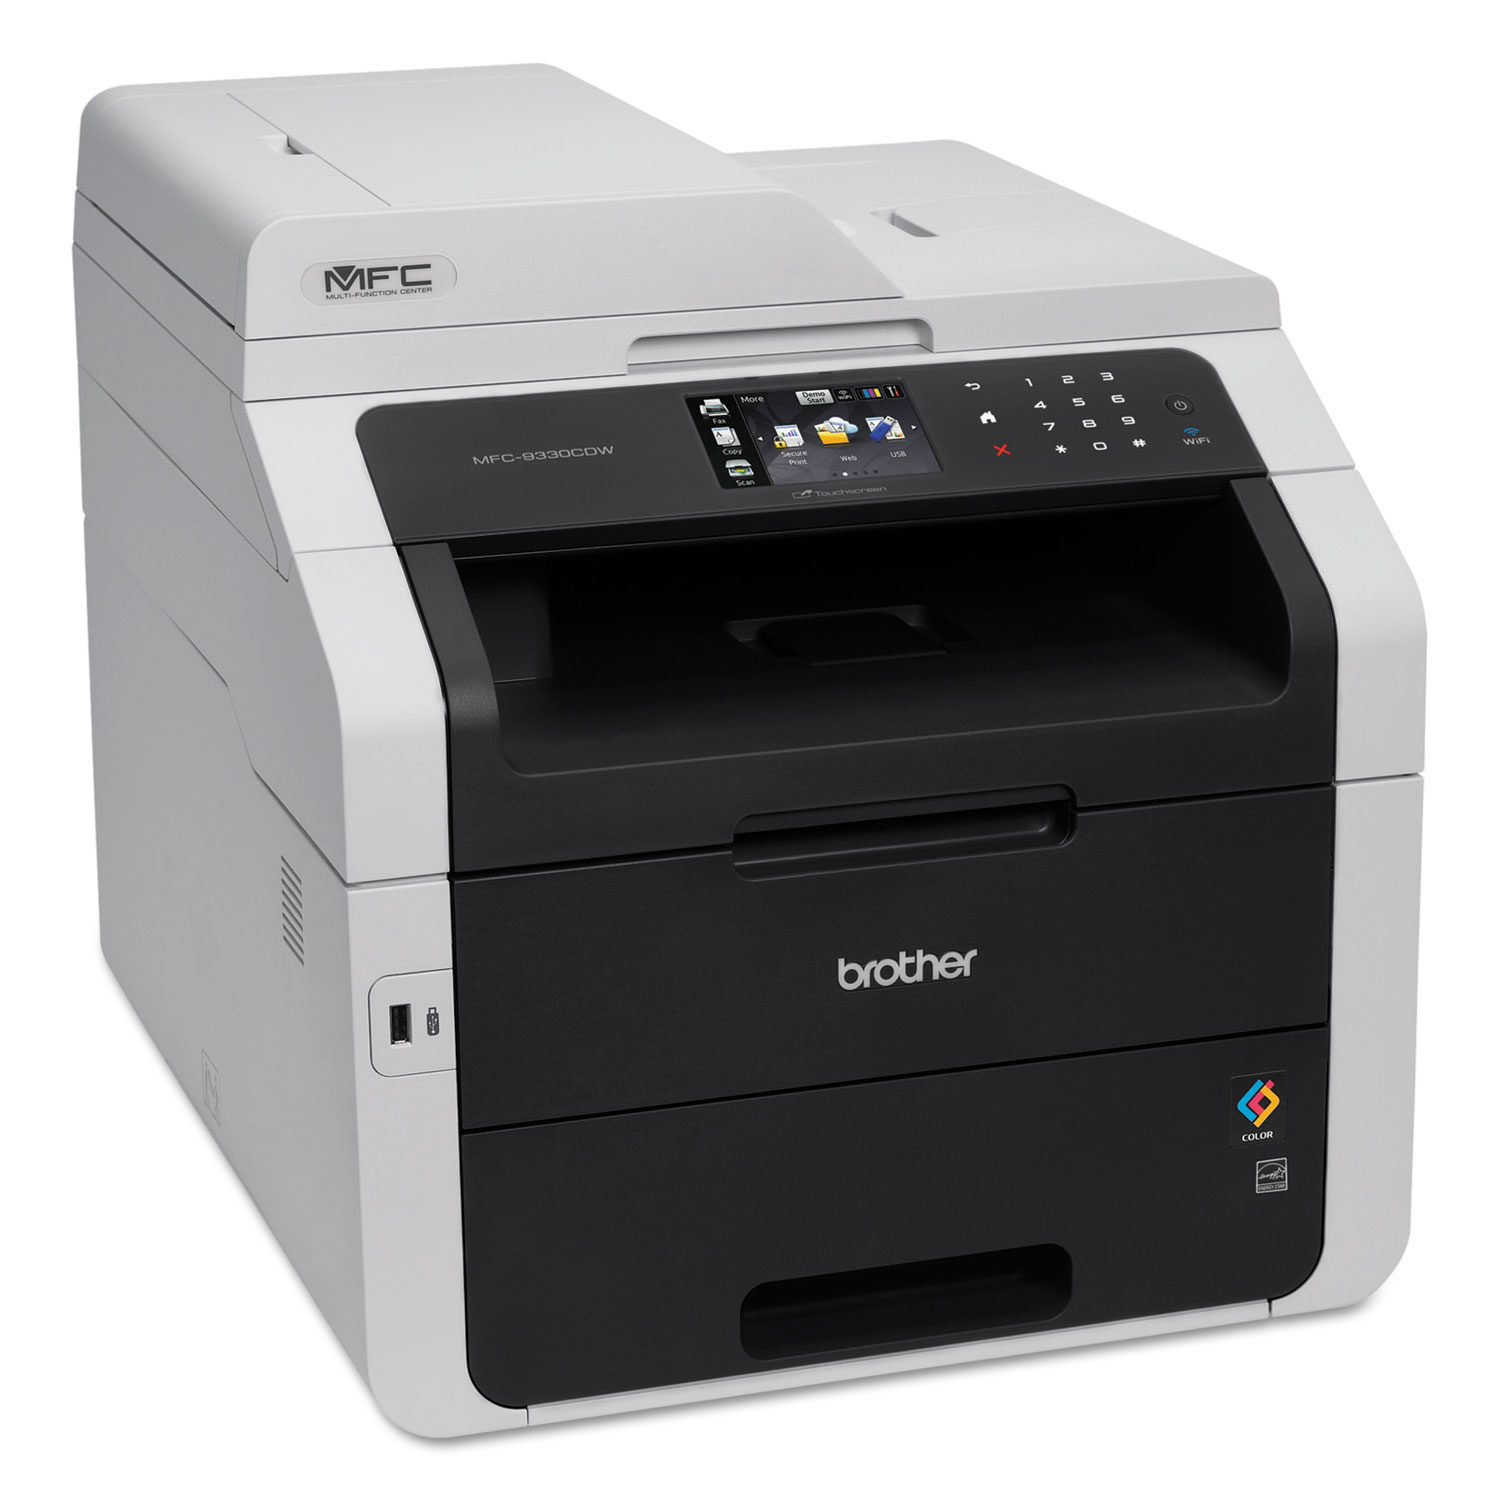 MFC-9330CDW Wireless Digital Color All-in-One, Copy/Fax/Print/Scan